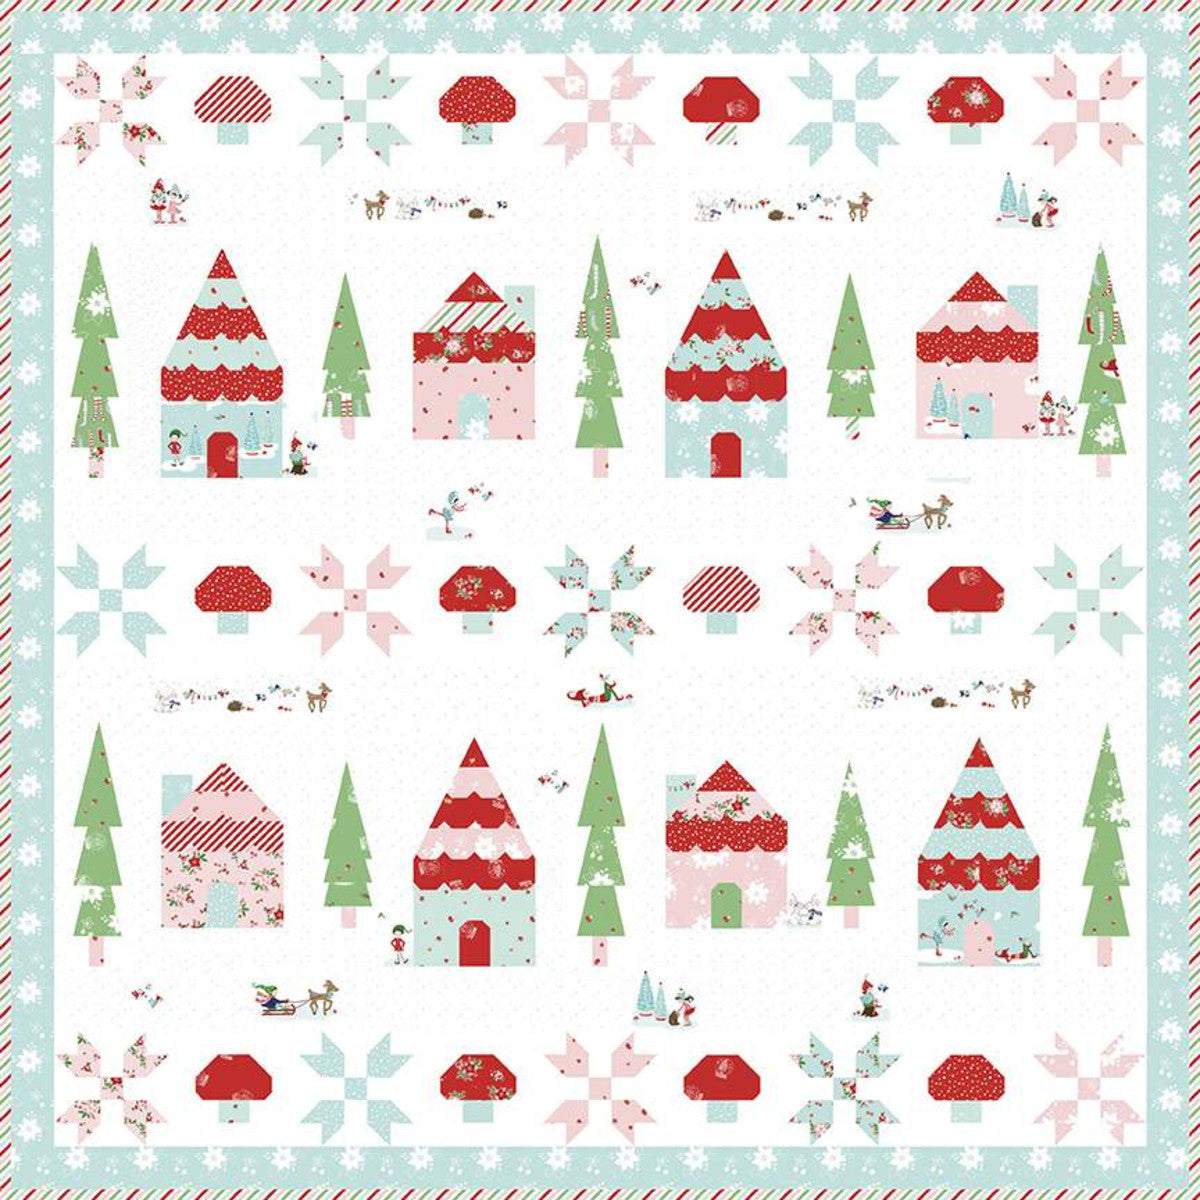 Pixie Ville Row Quilt Boxed Kit by Tasha Noel for Riley Blake Designs Keepsake box with Pixie Noel 2 fabrics for top and binding quilt snow village with mushrooms houses trees in aqua red green and pink adorable Christmas winter holiday gift 